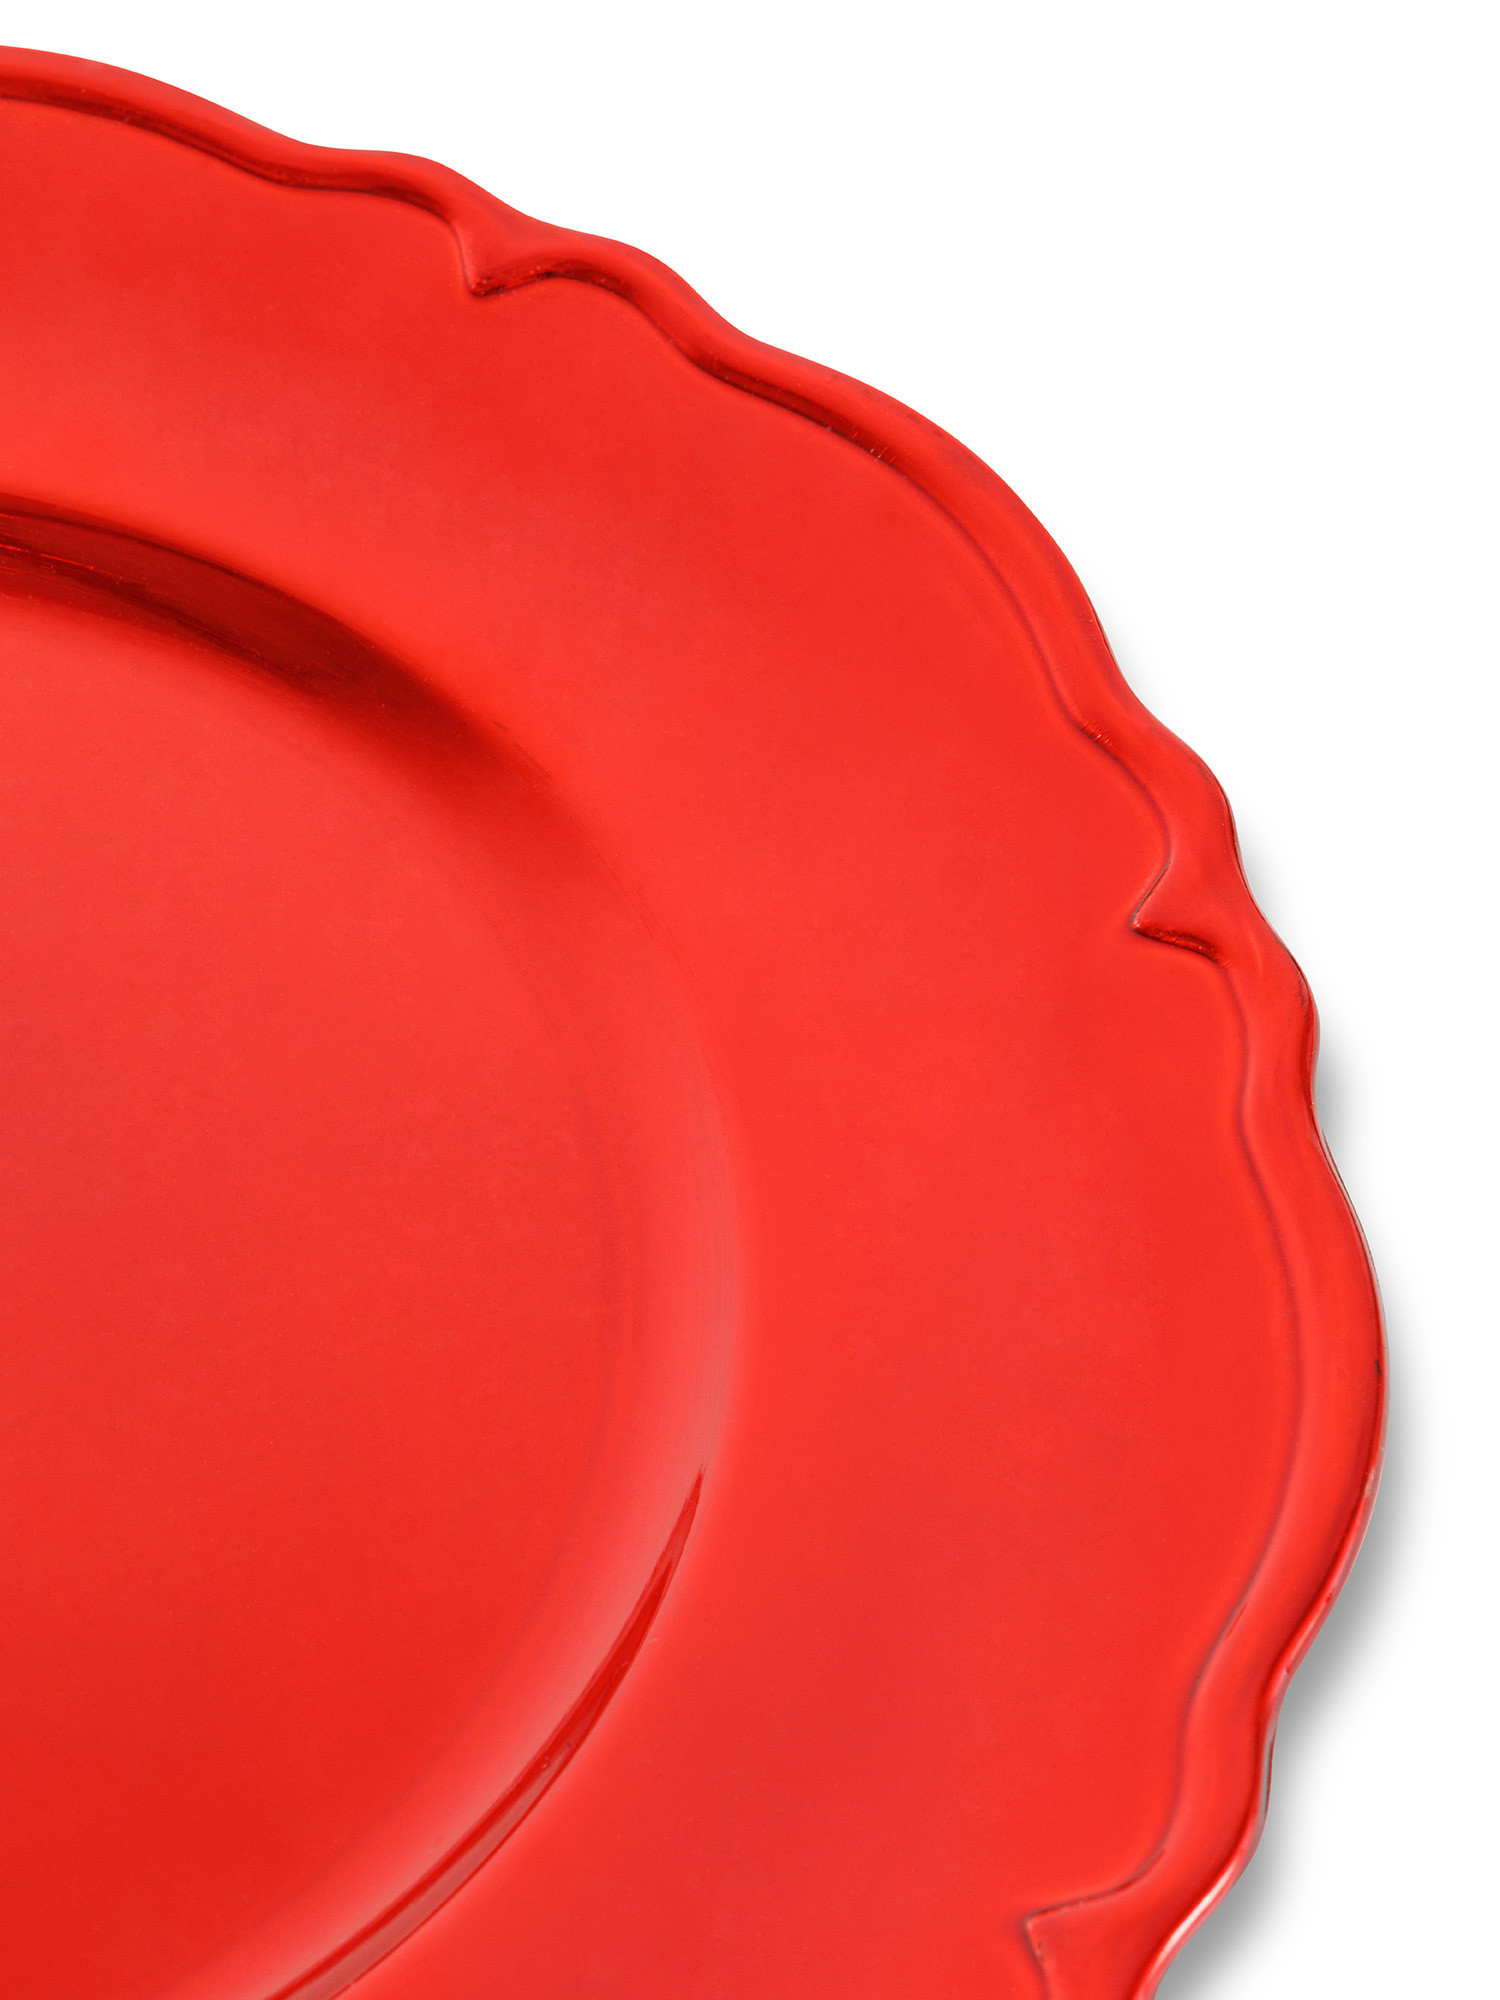 Plastic charger plate, Red, large image number 1